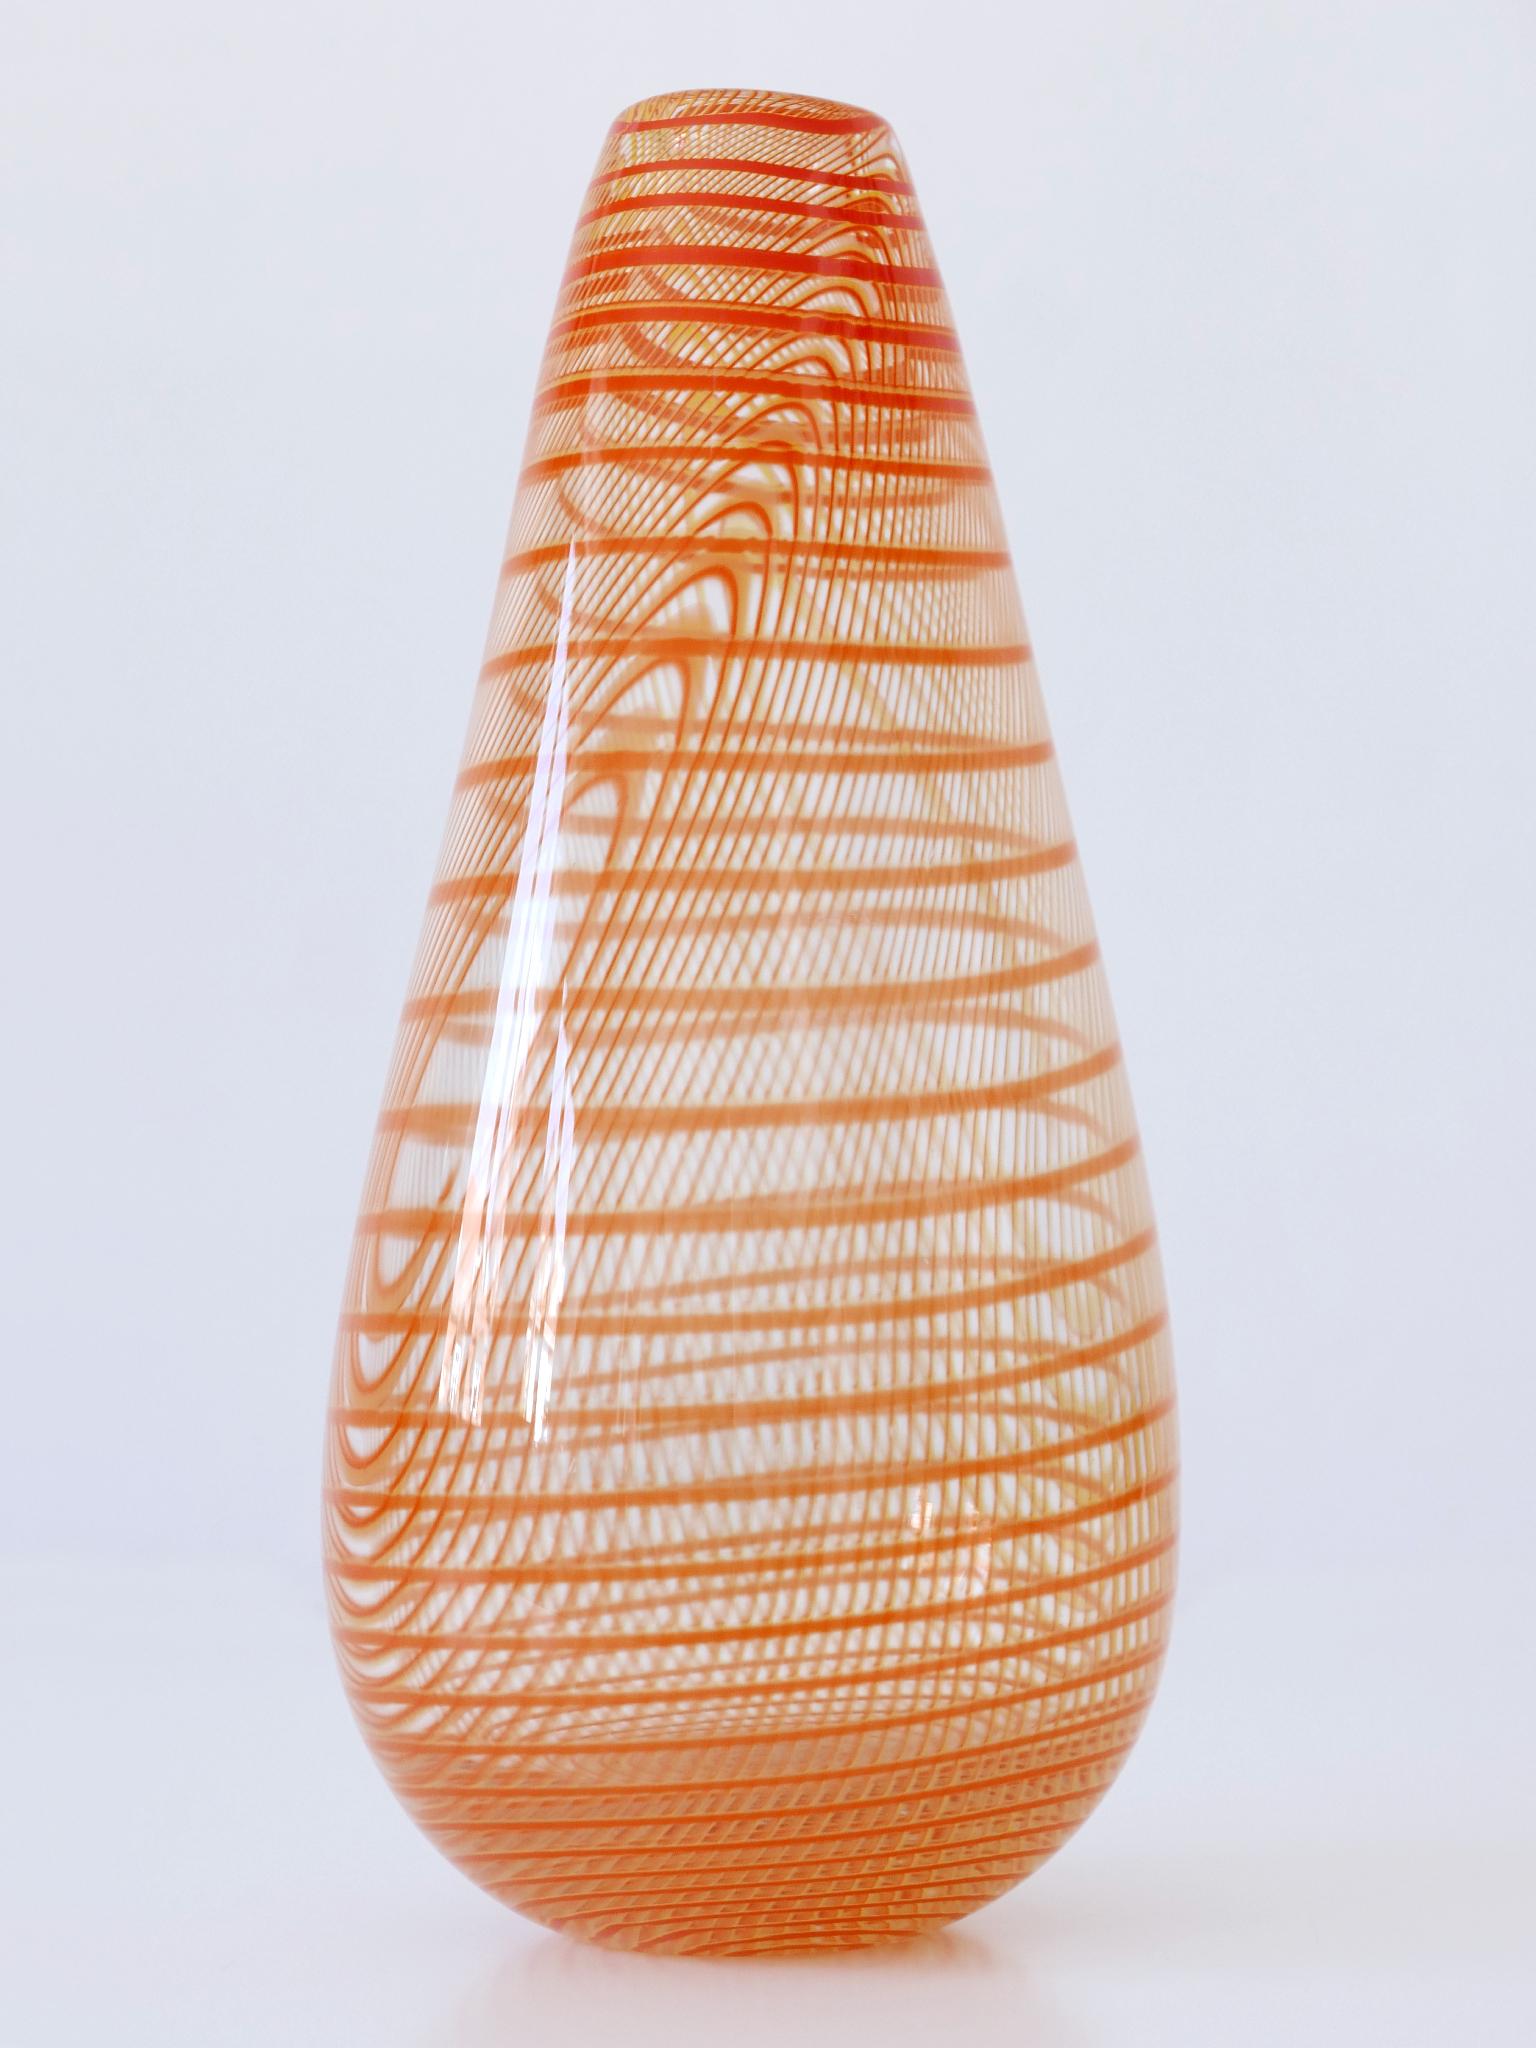 Signed & Limited Edition Art Glass Vase by Olle Brozén for Kosta Boda Sweden For Sale 1